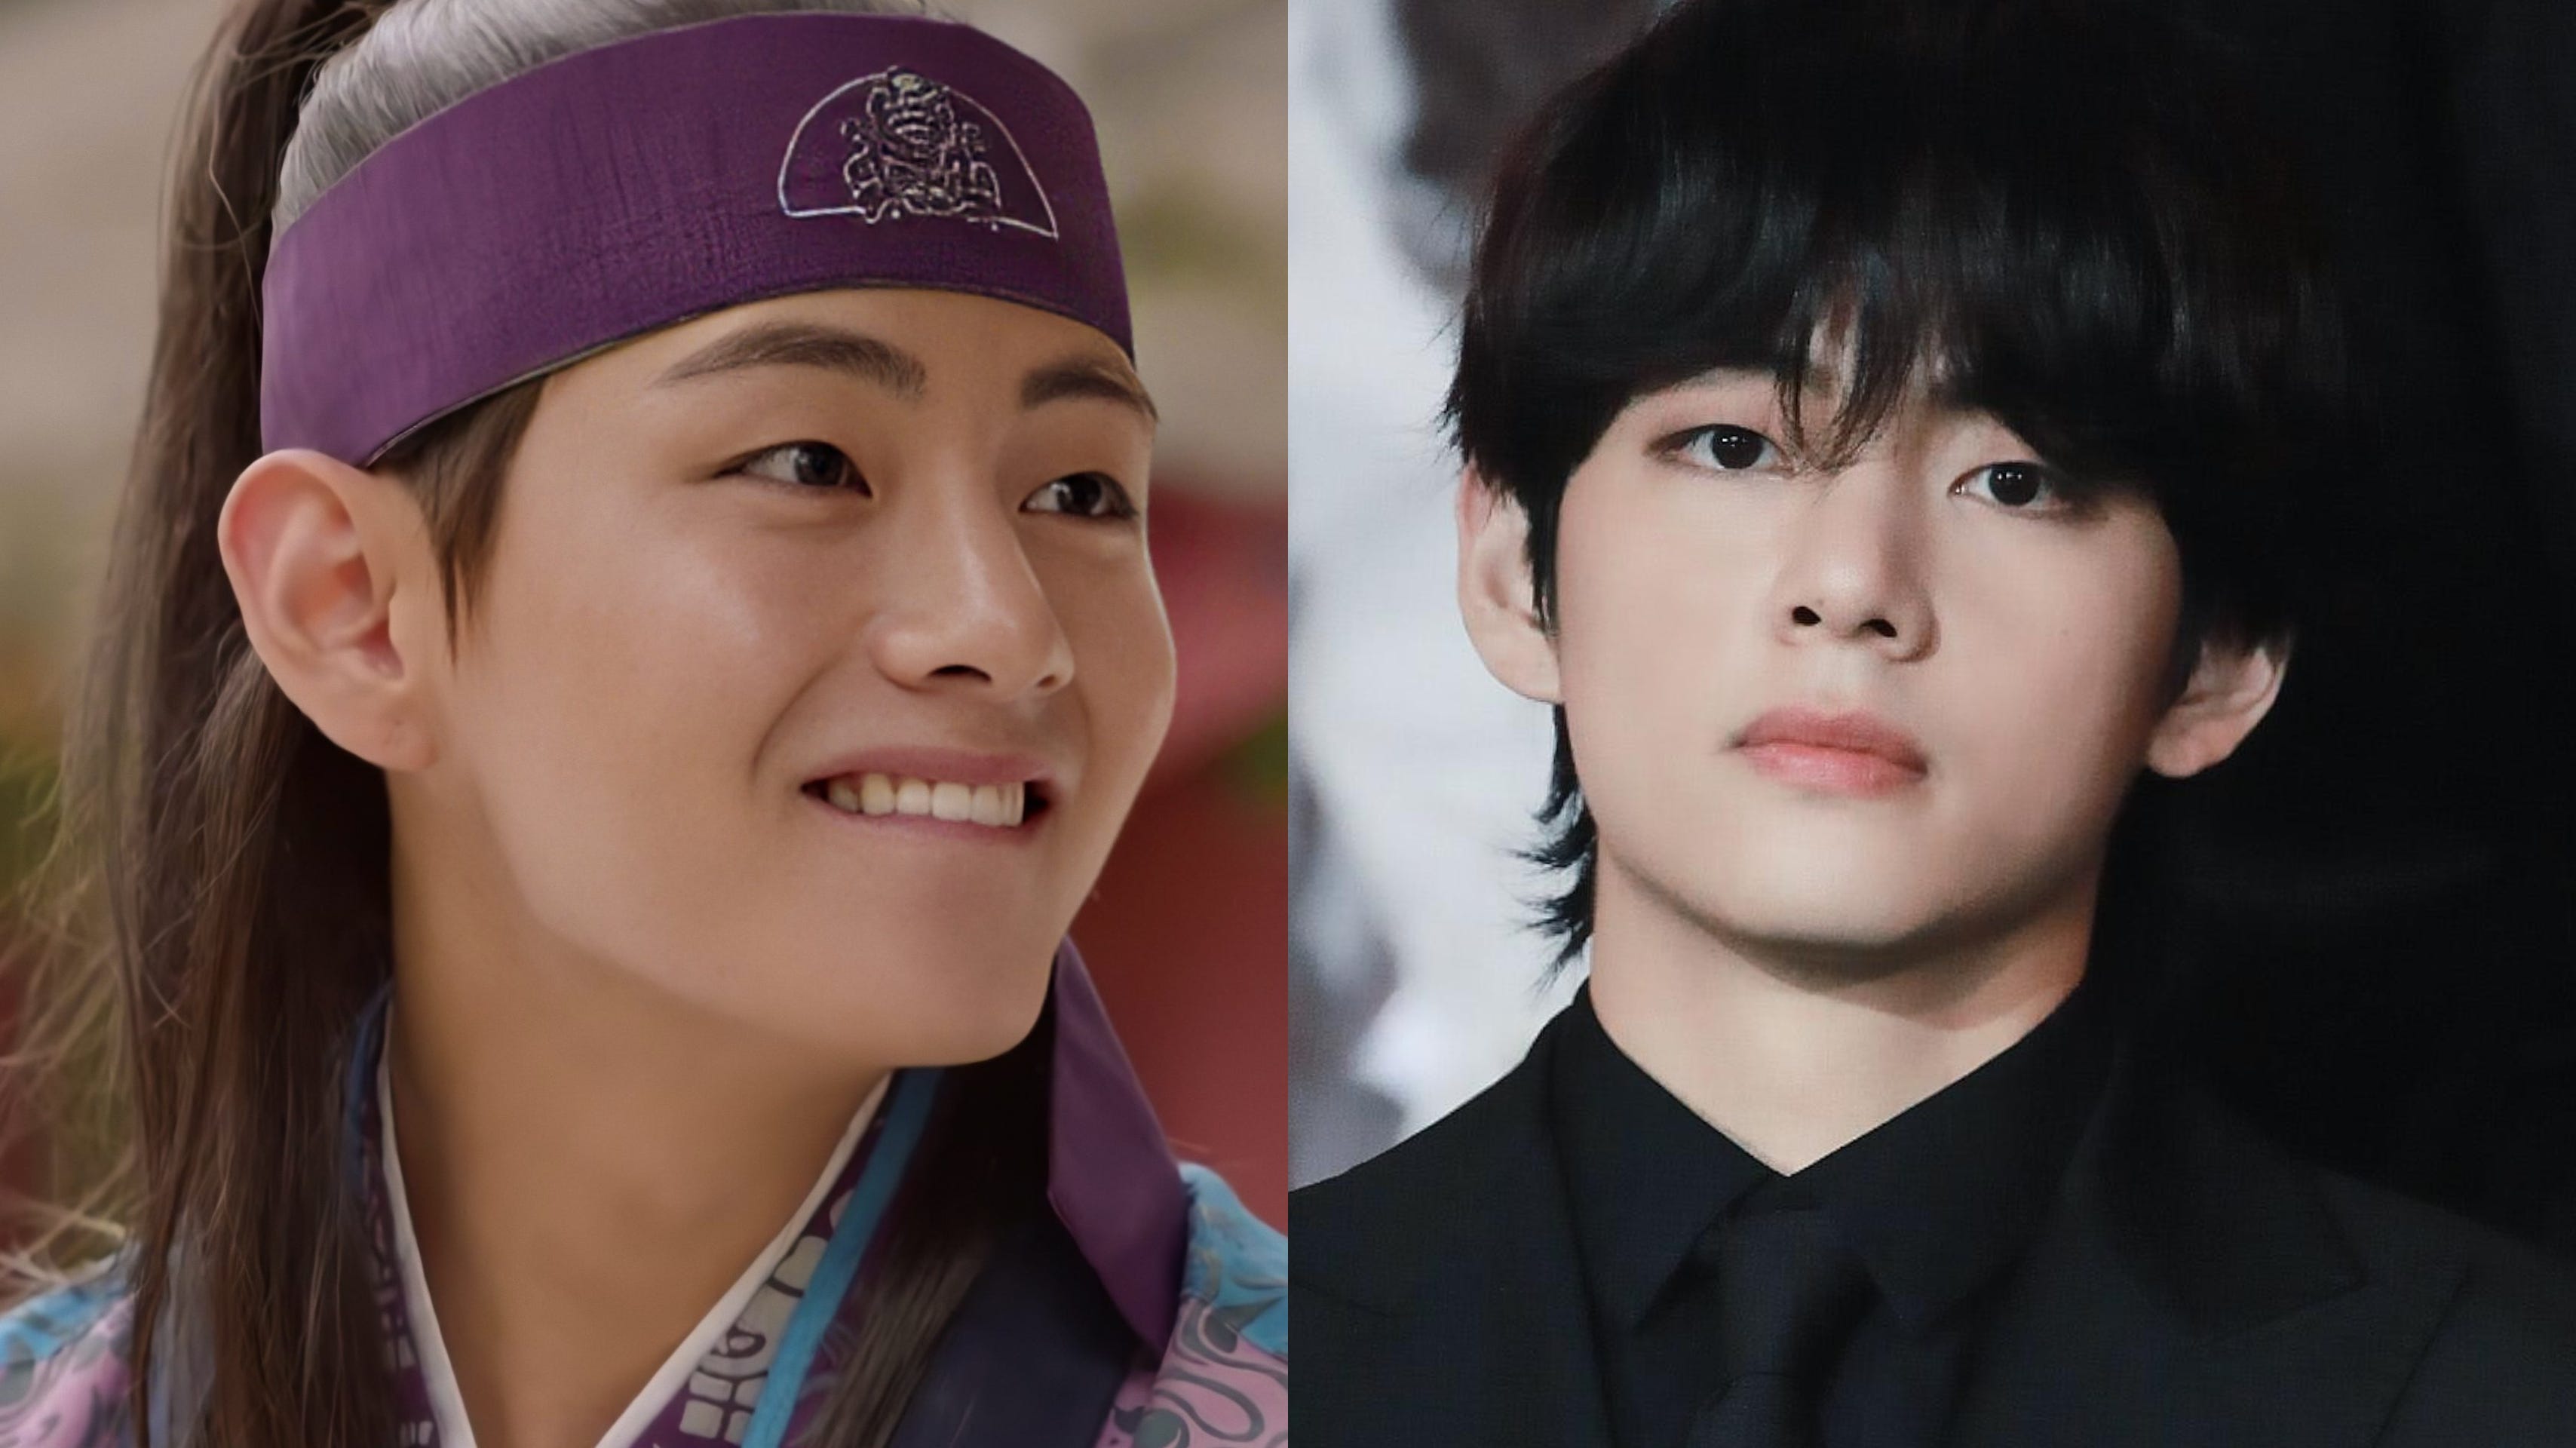 Bts S Member Kim Taehyung Alongside Being The Most Popular Member Of Bts Is Now The Most Handsome Man In The World 2020 By Stessa Jones Medium